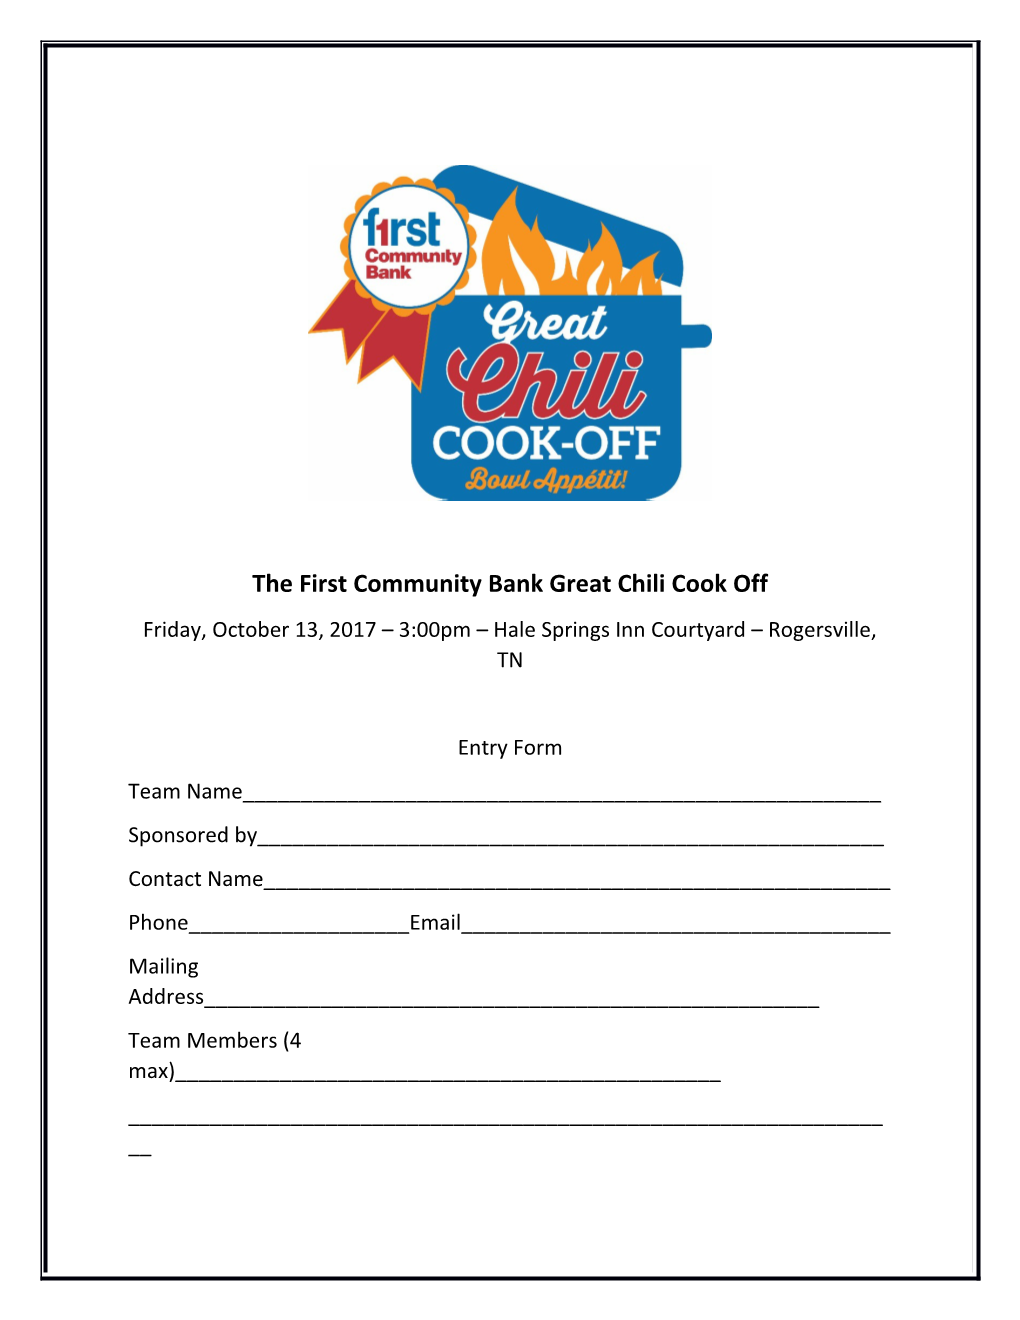 The First Community Bank Great Chili Cook Off